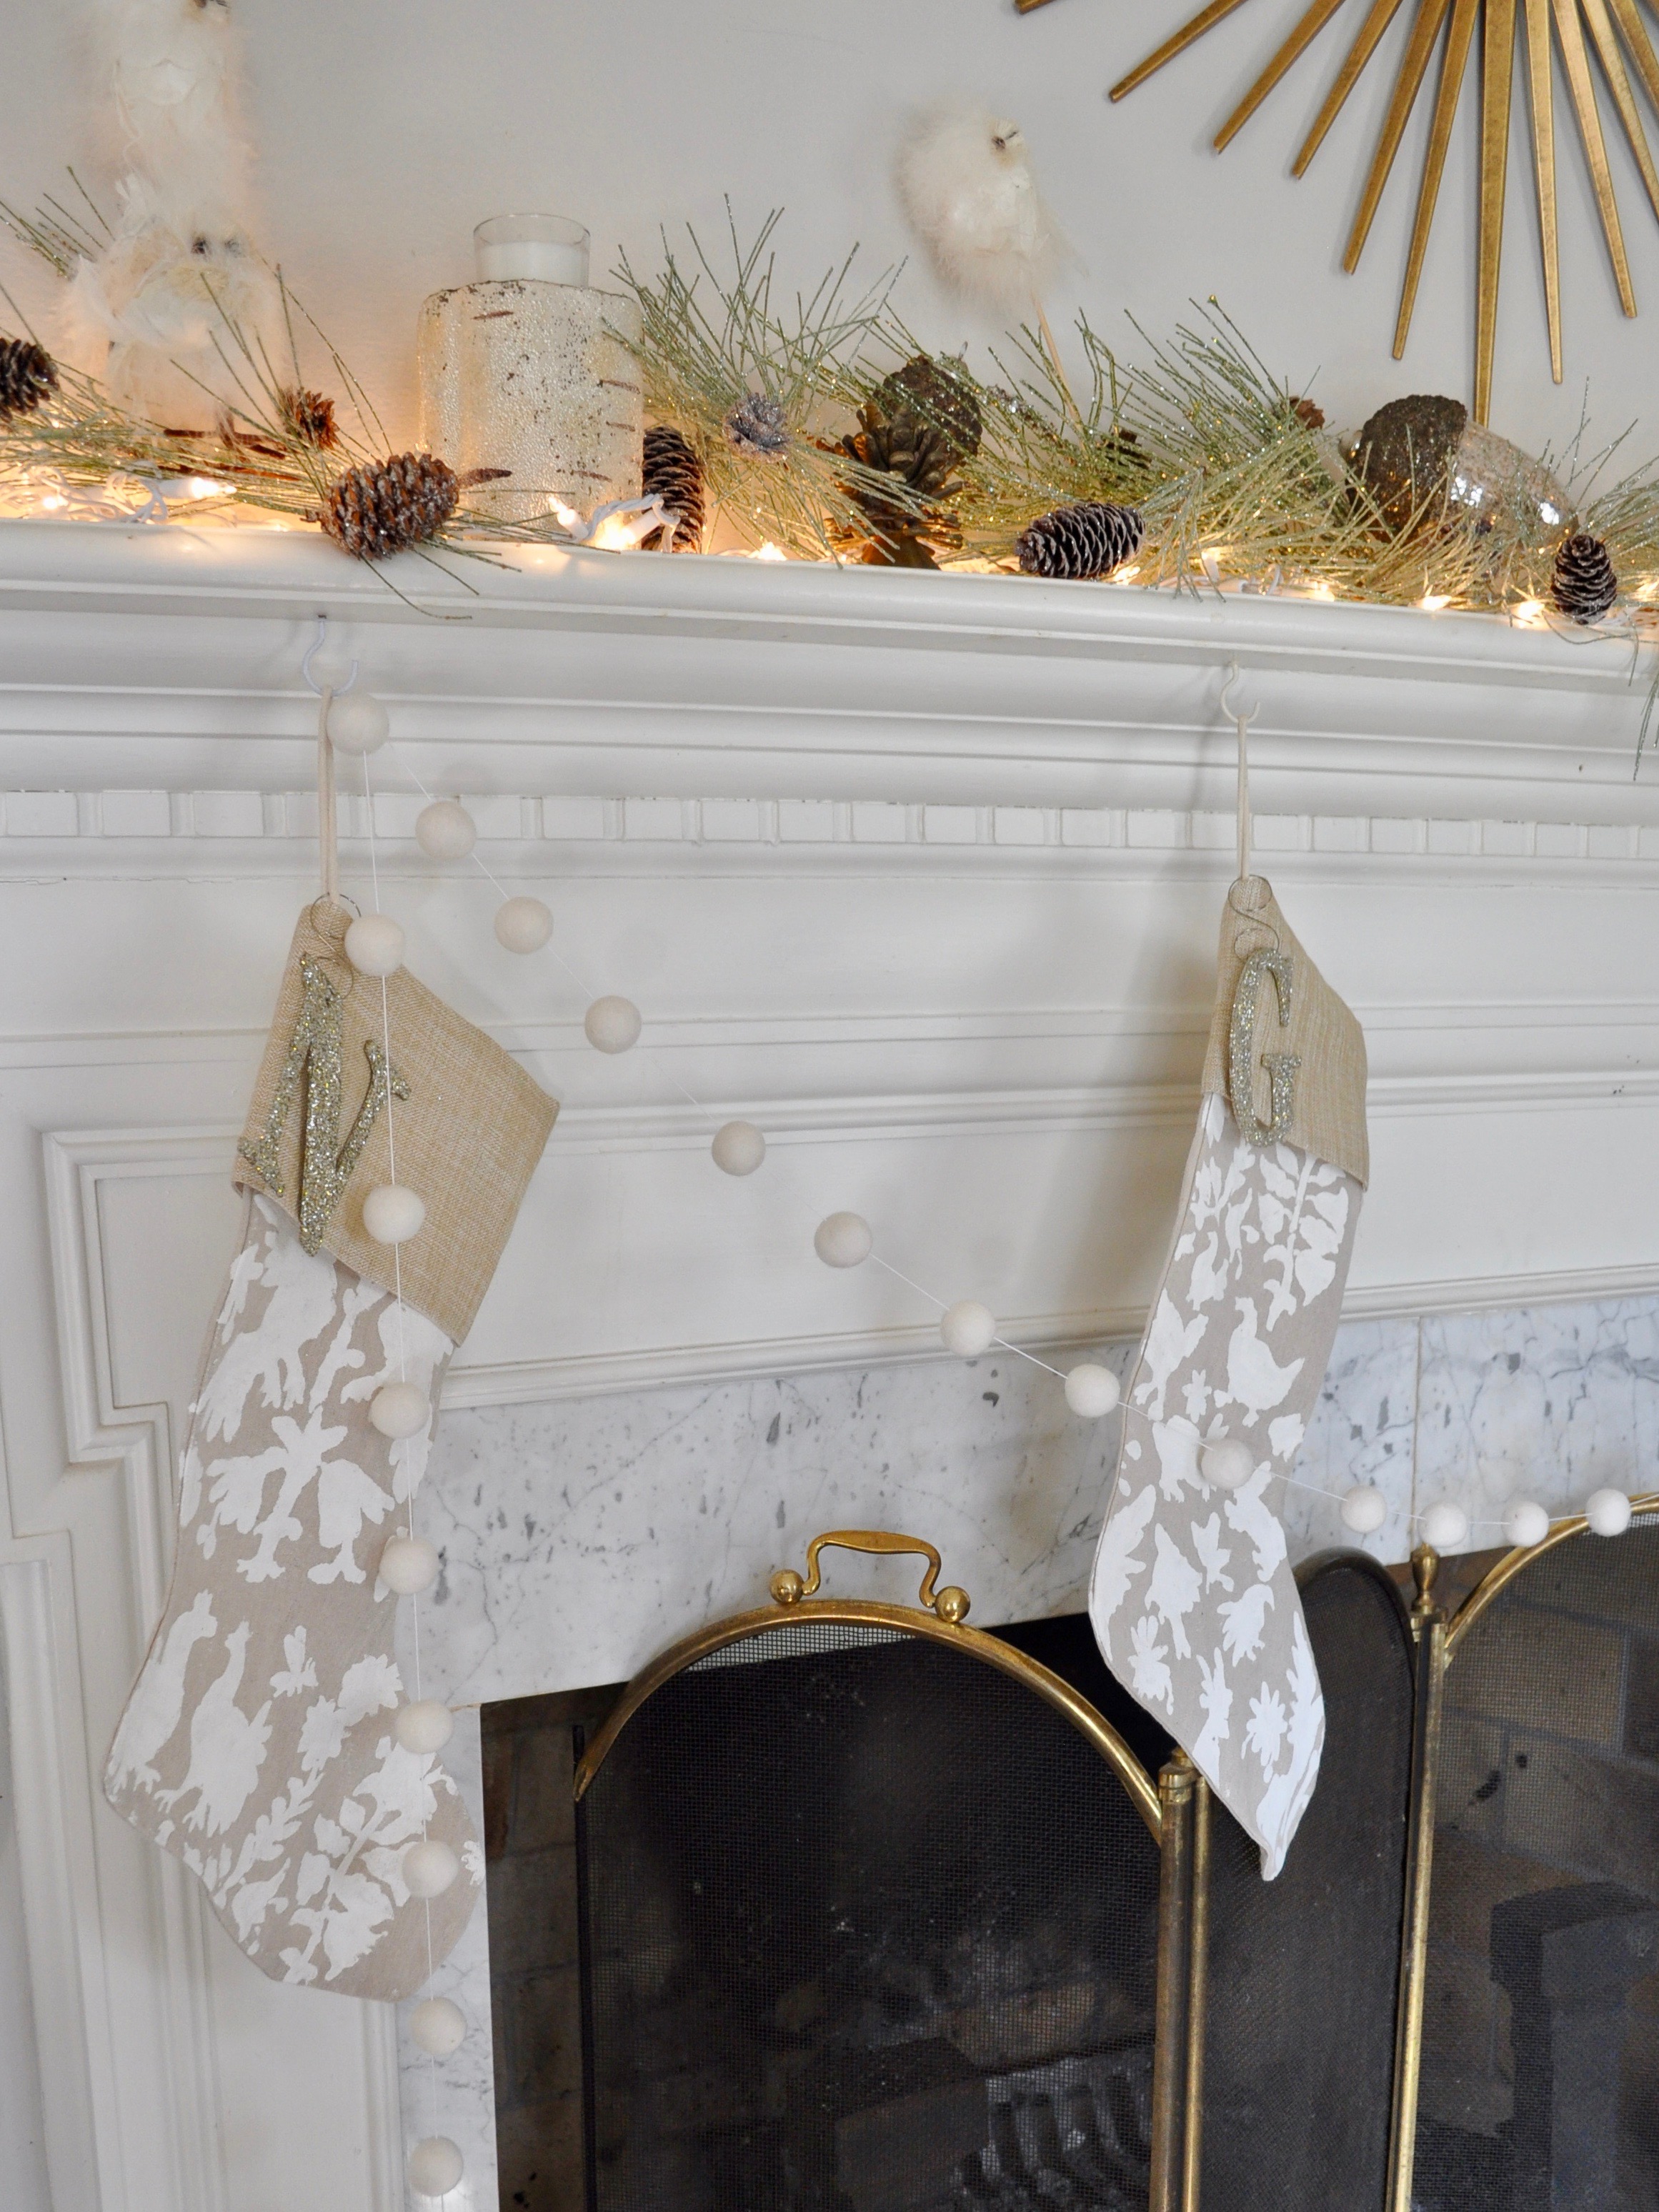 The stockings were hung by the chimney with care…